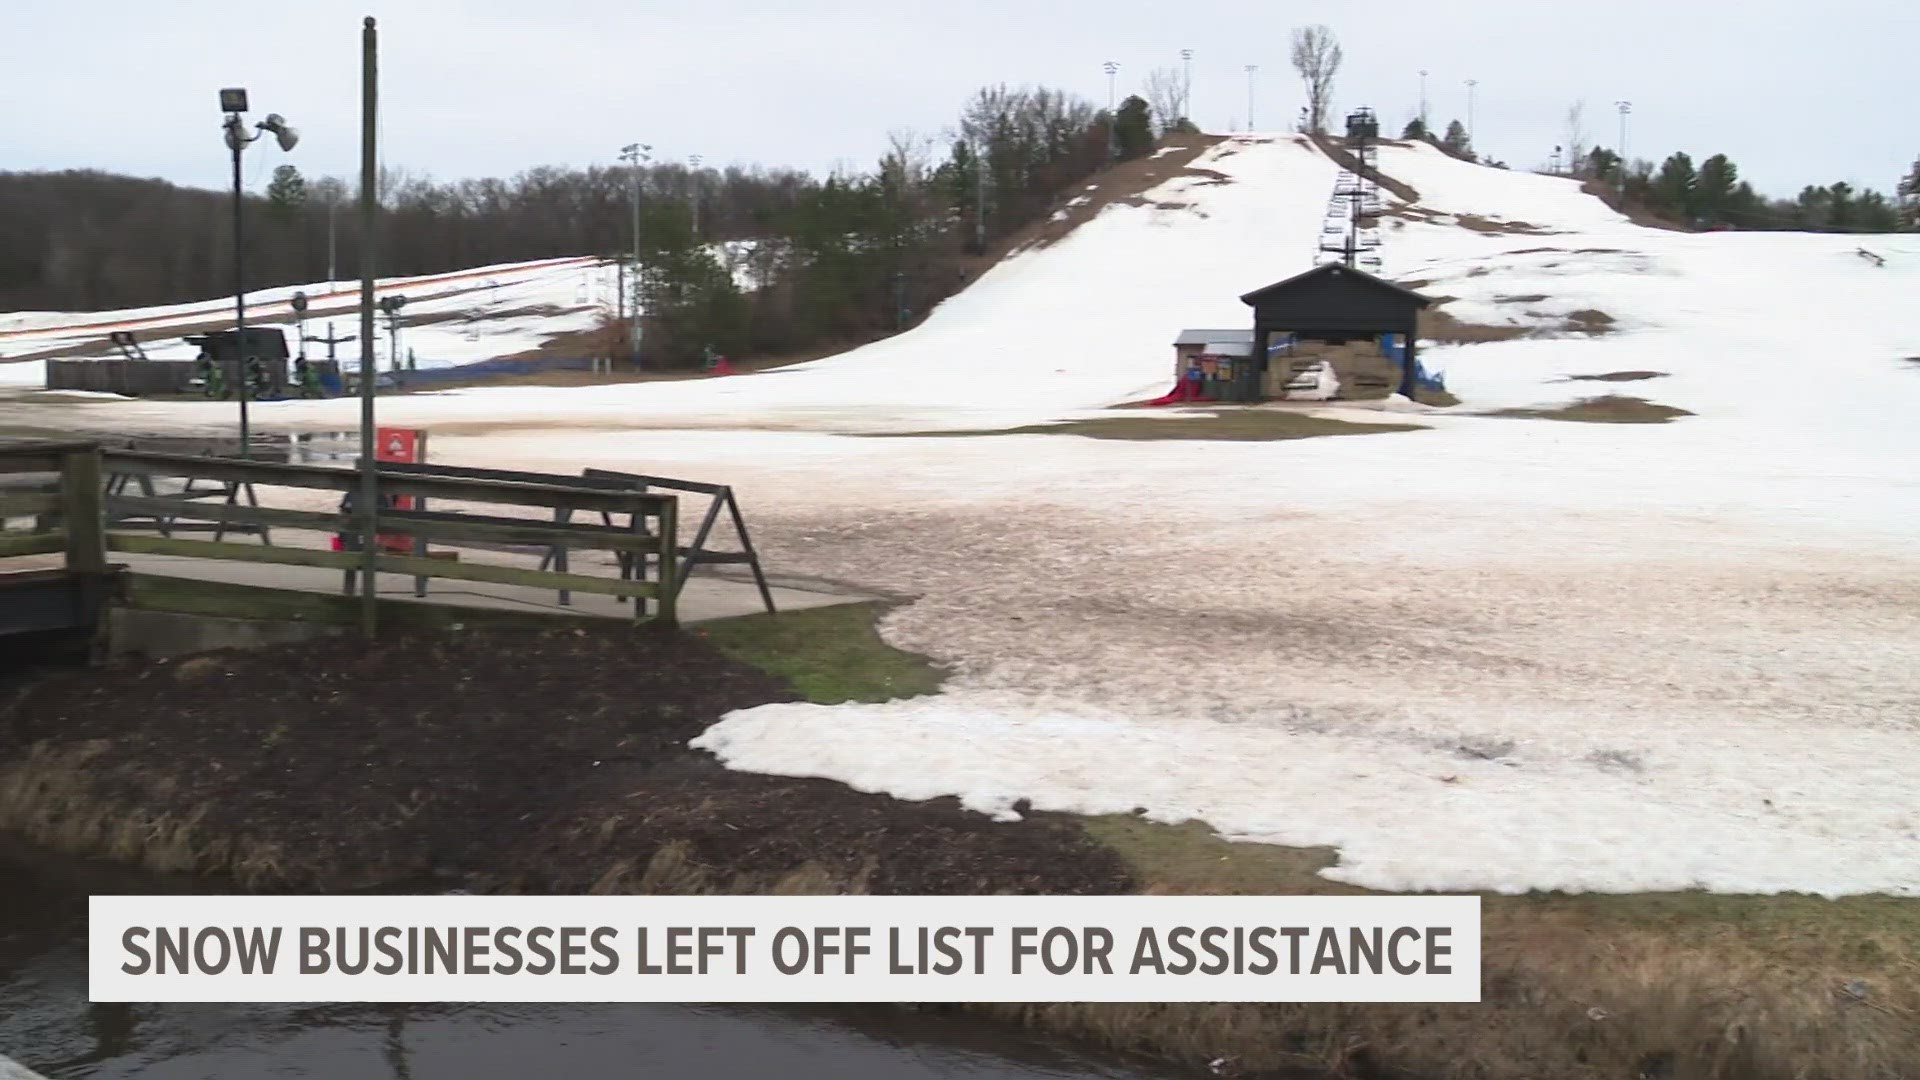 This season was not the season the team at Cannonsburg Ski Area wanted to see.